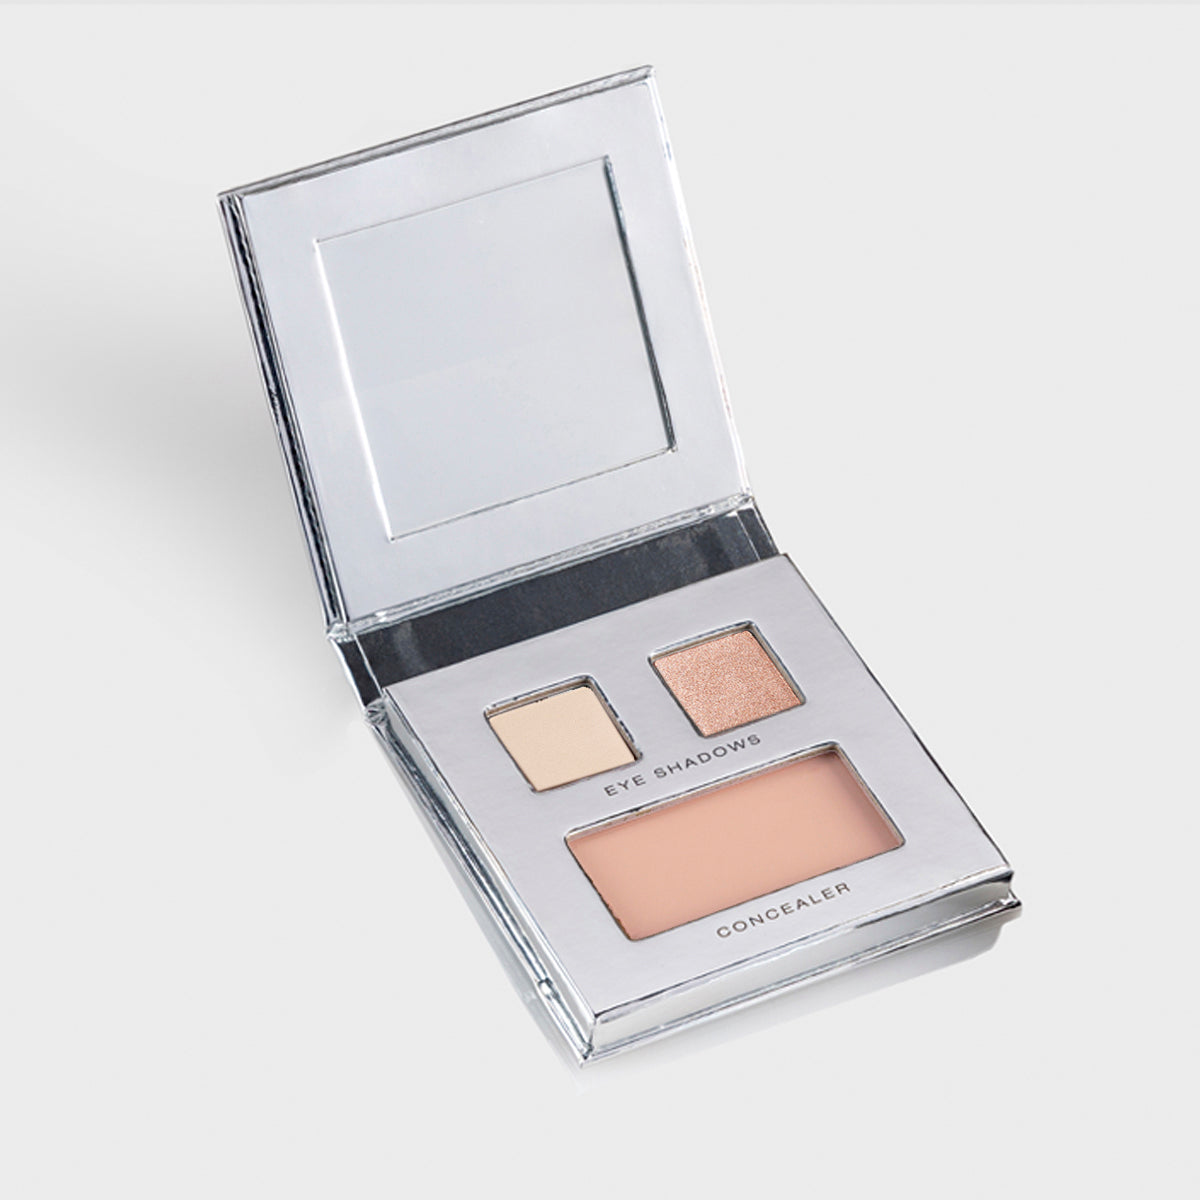 The open Fold Out Eyes palette with two eye shadows and one concealer in peaches 'n cream